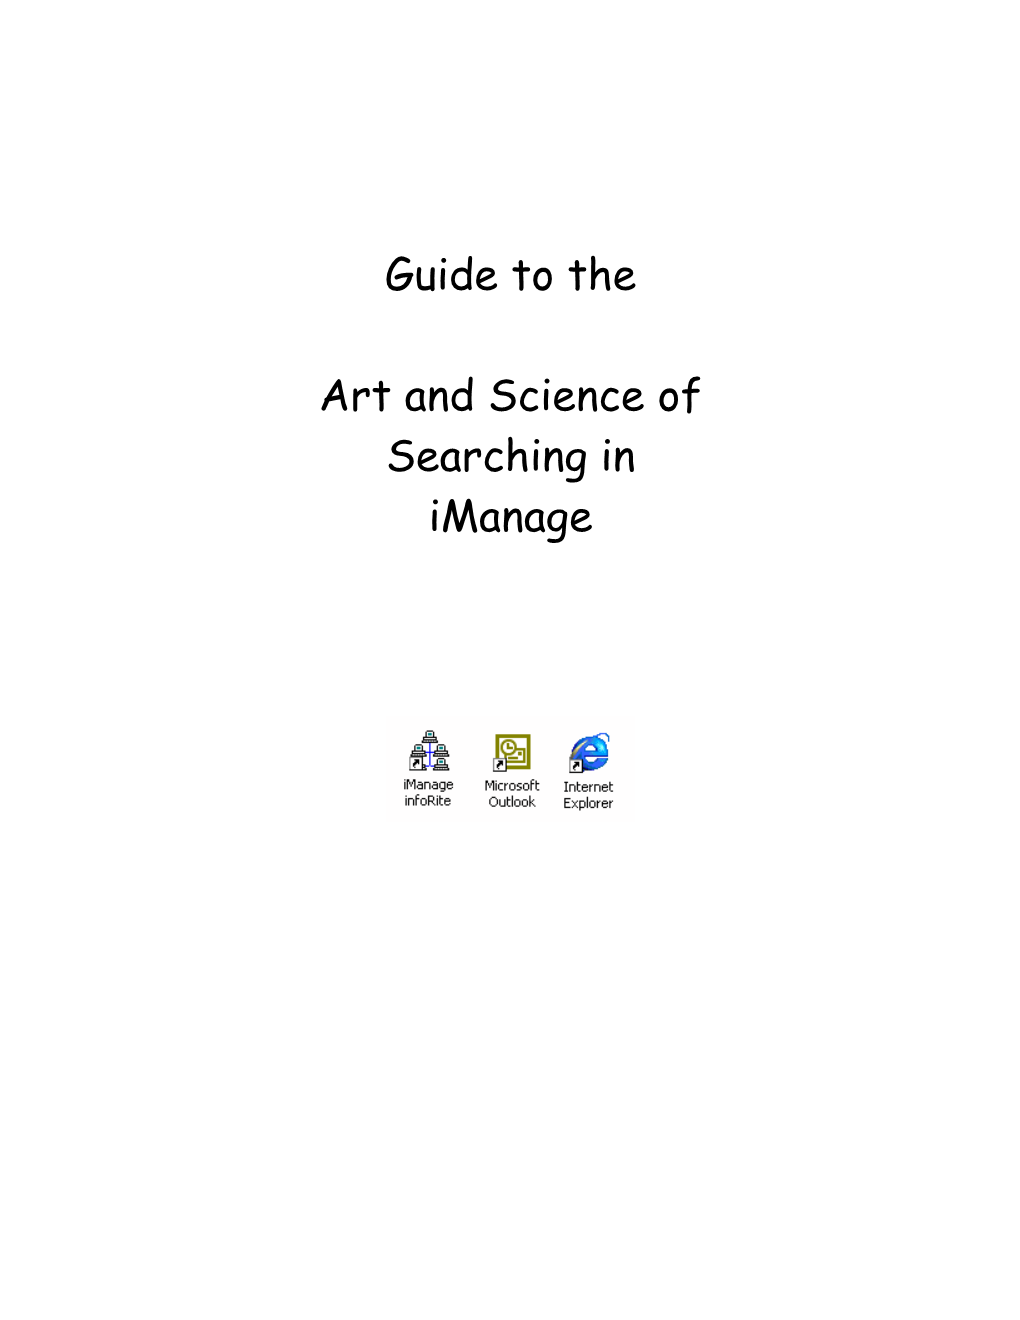 Guide to the Art and Science of Searching in Imanage